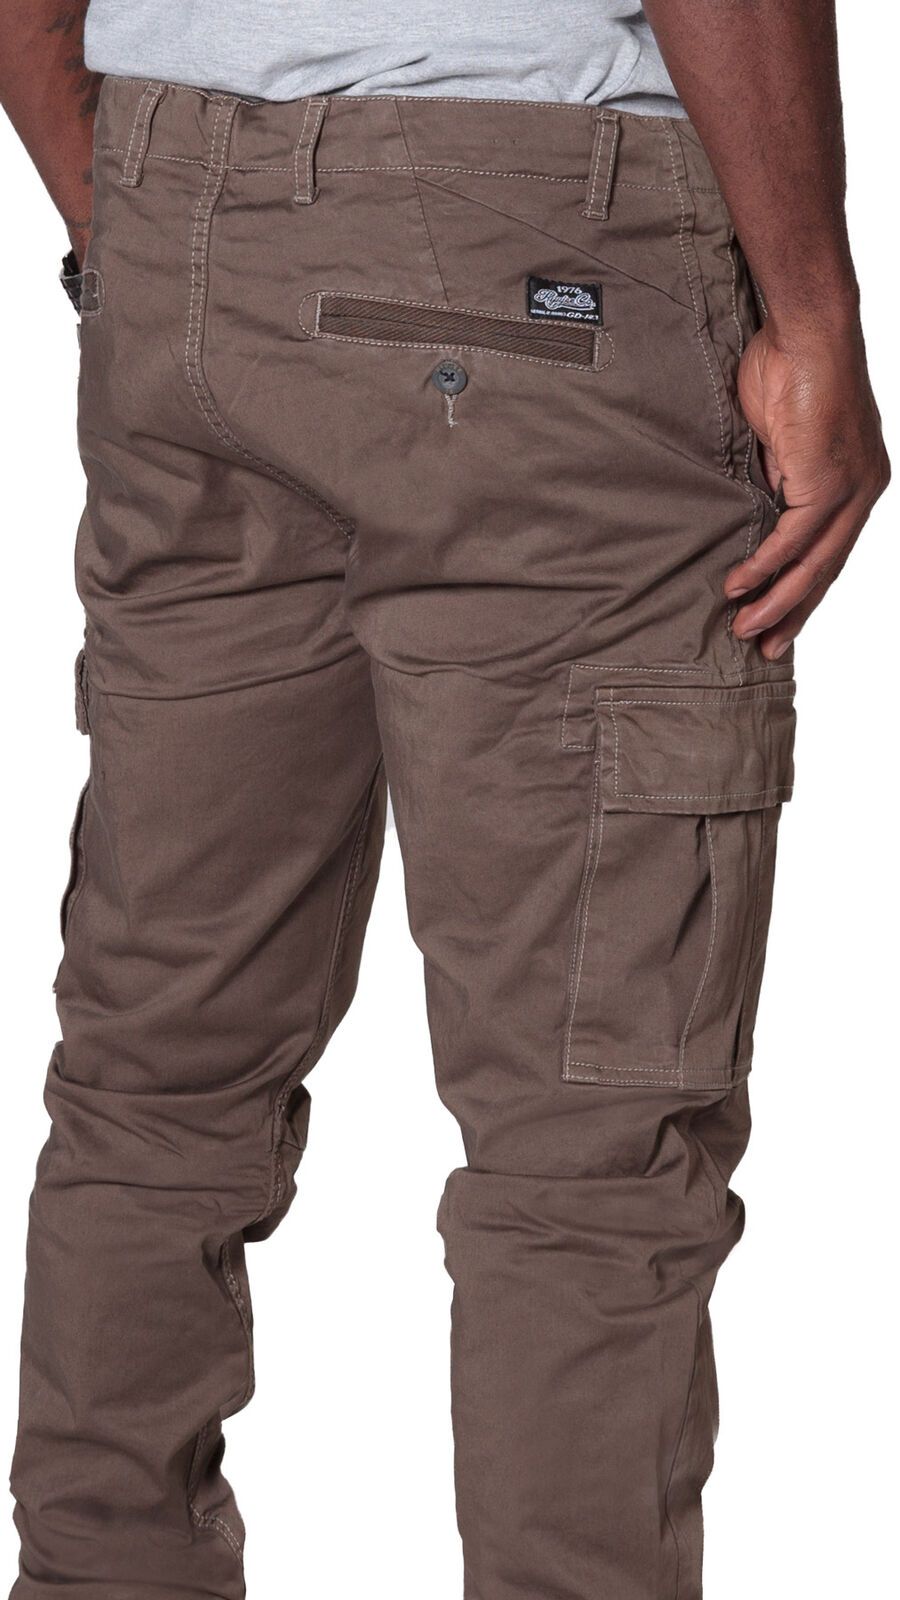 Angled rear focus of cargo trousers, with clear view of stitching, rear and cargo pockets and slightly stretchy brown material.